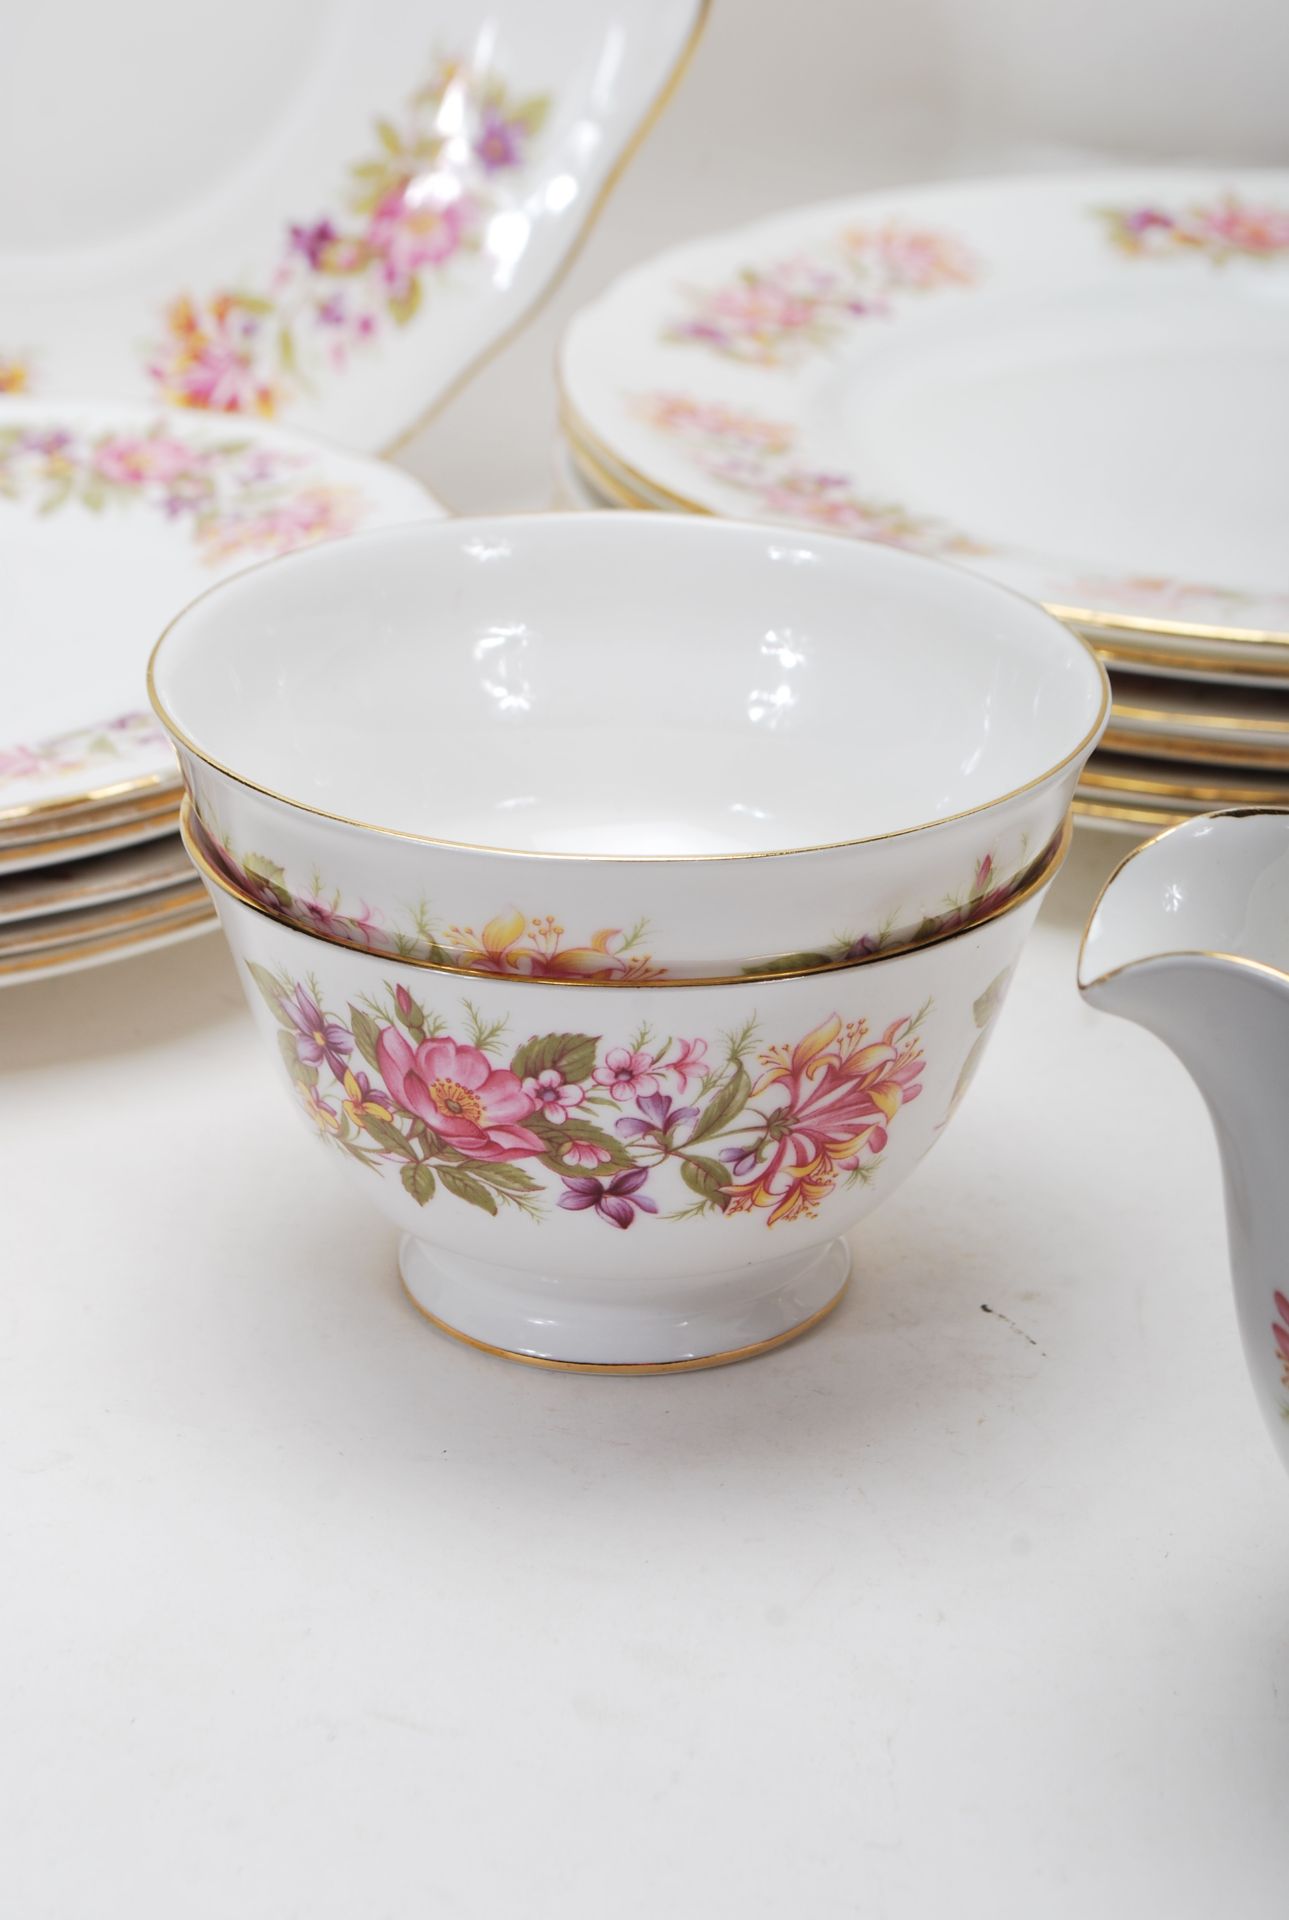 COLCLOUGH WAYSIDE PATTERN DINNER SERVICE - Image 4 of 12